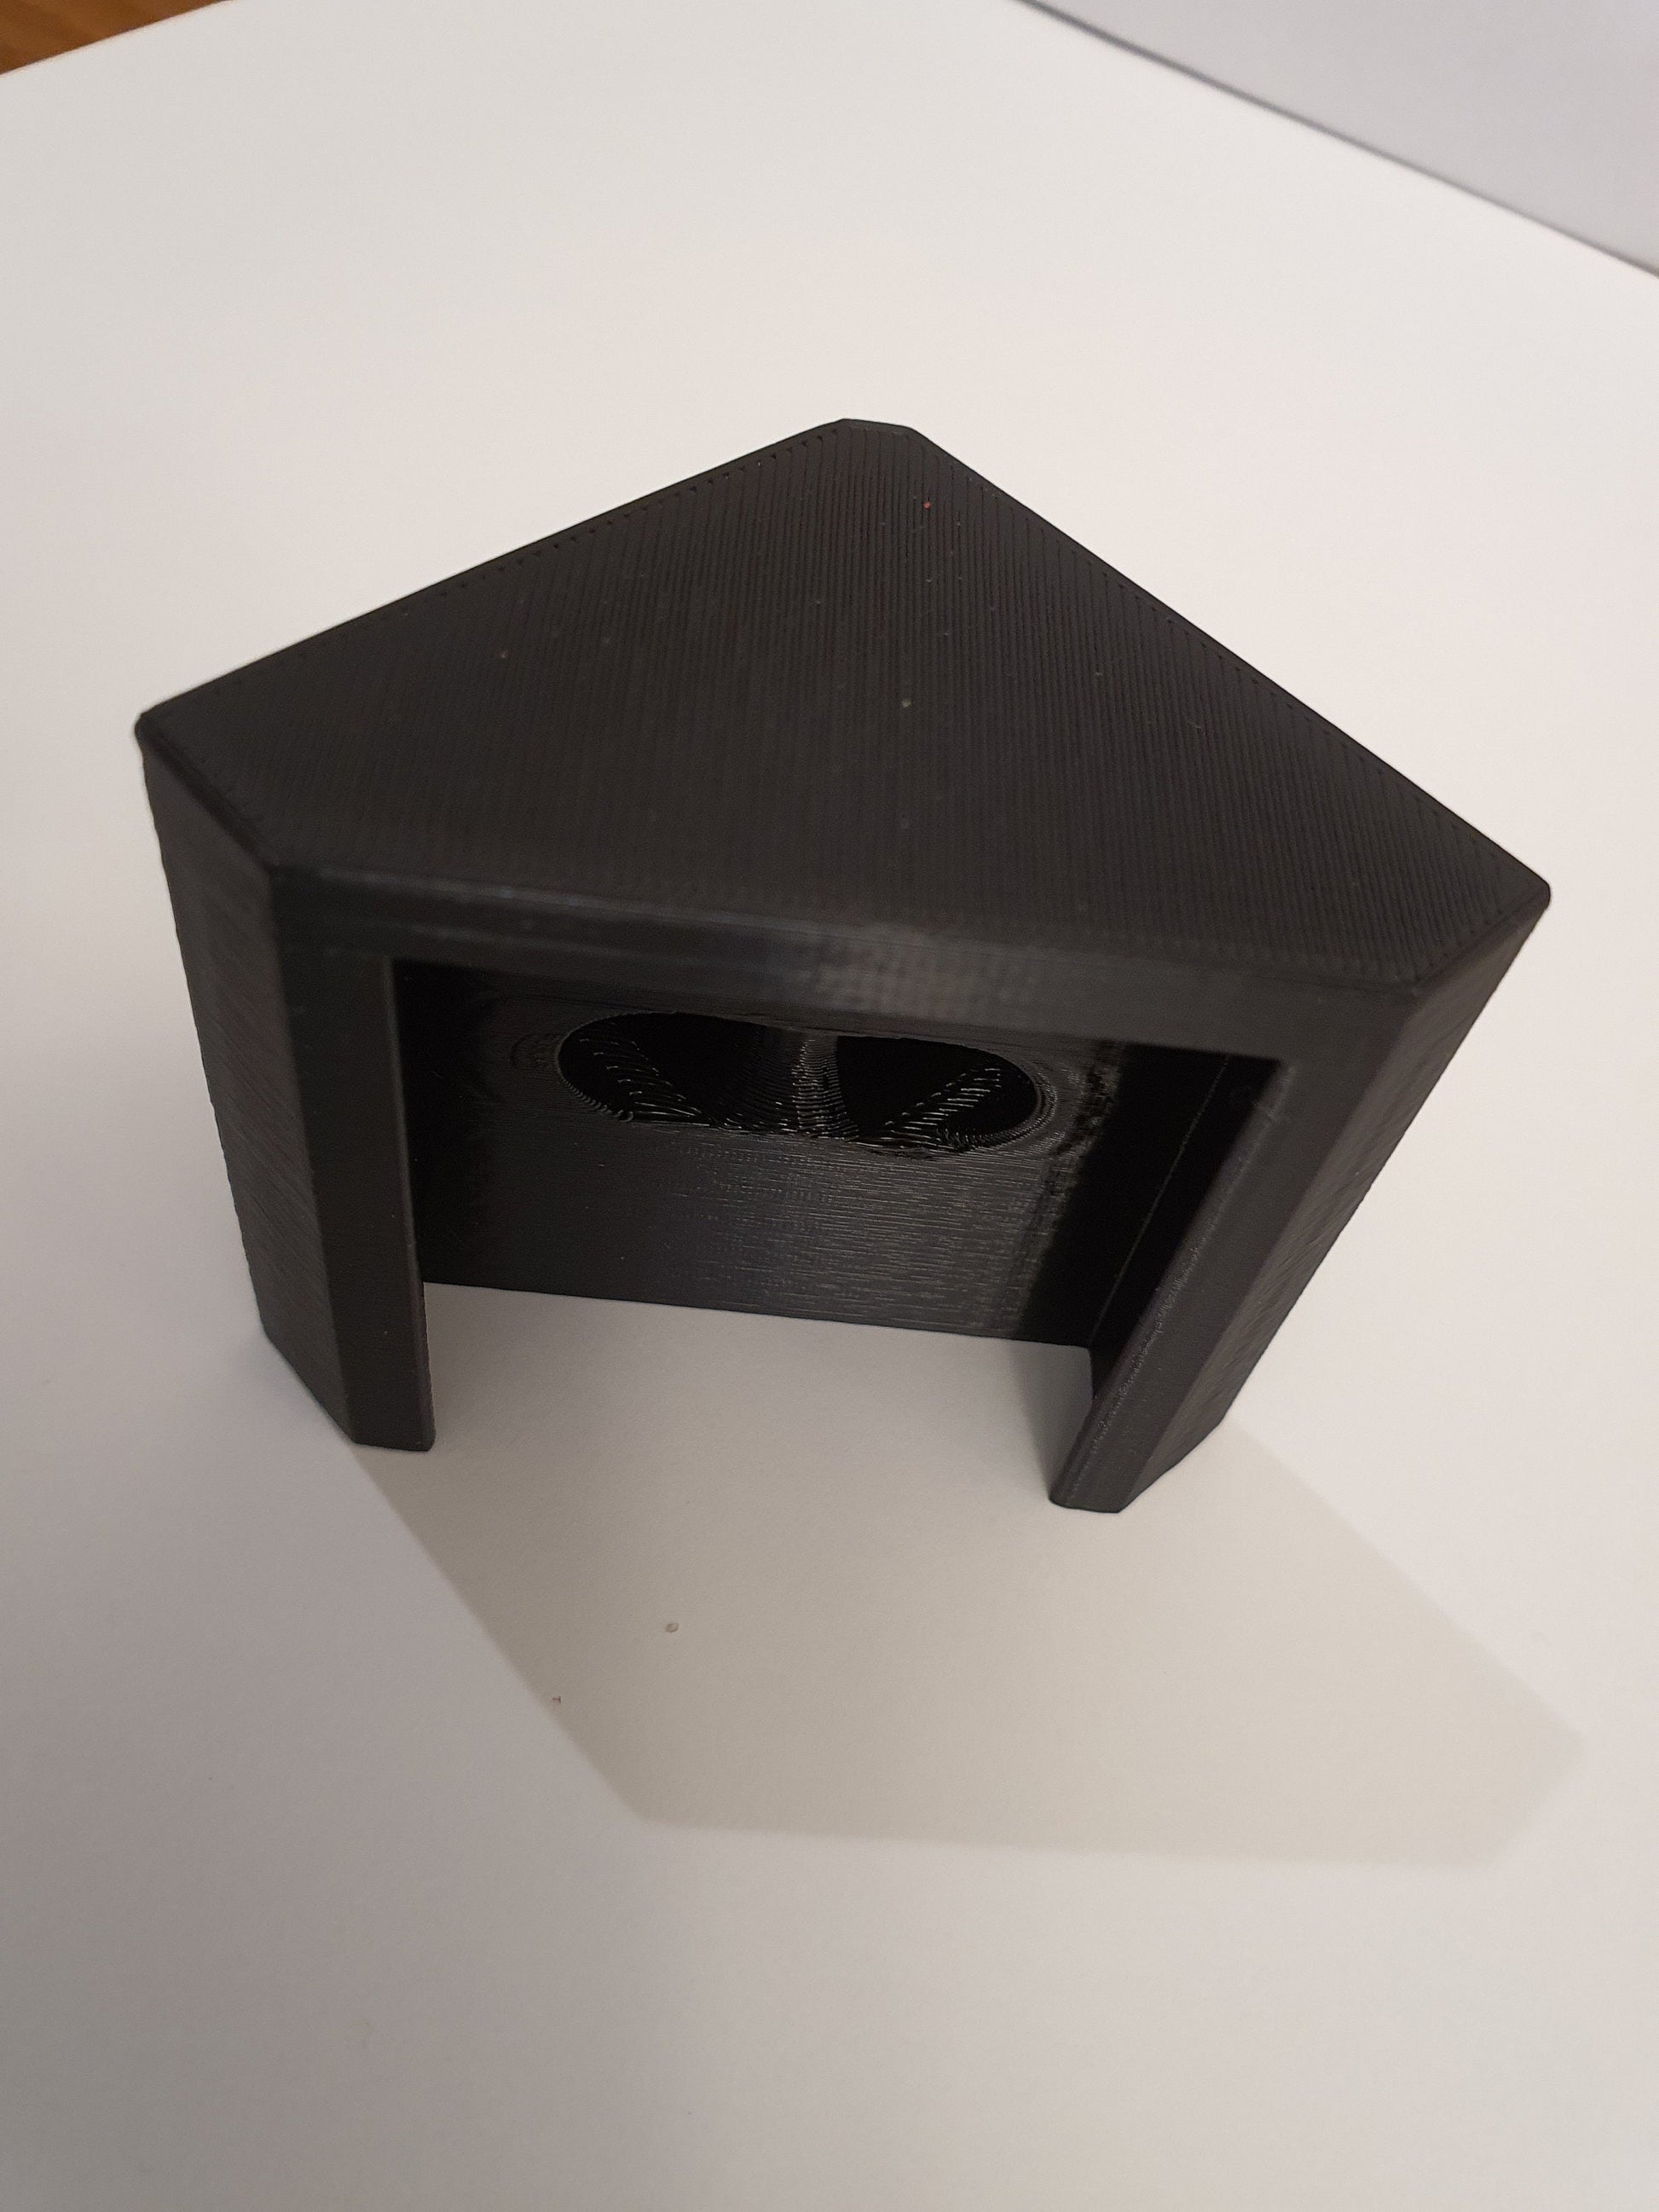 Wyze Cam Mount, 45 Degree Corner For V2. Get The Perfect Viewing Angle With Wyze Cam Mount For Corners